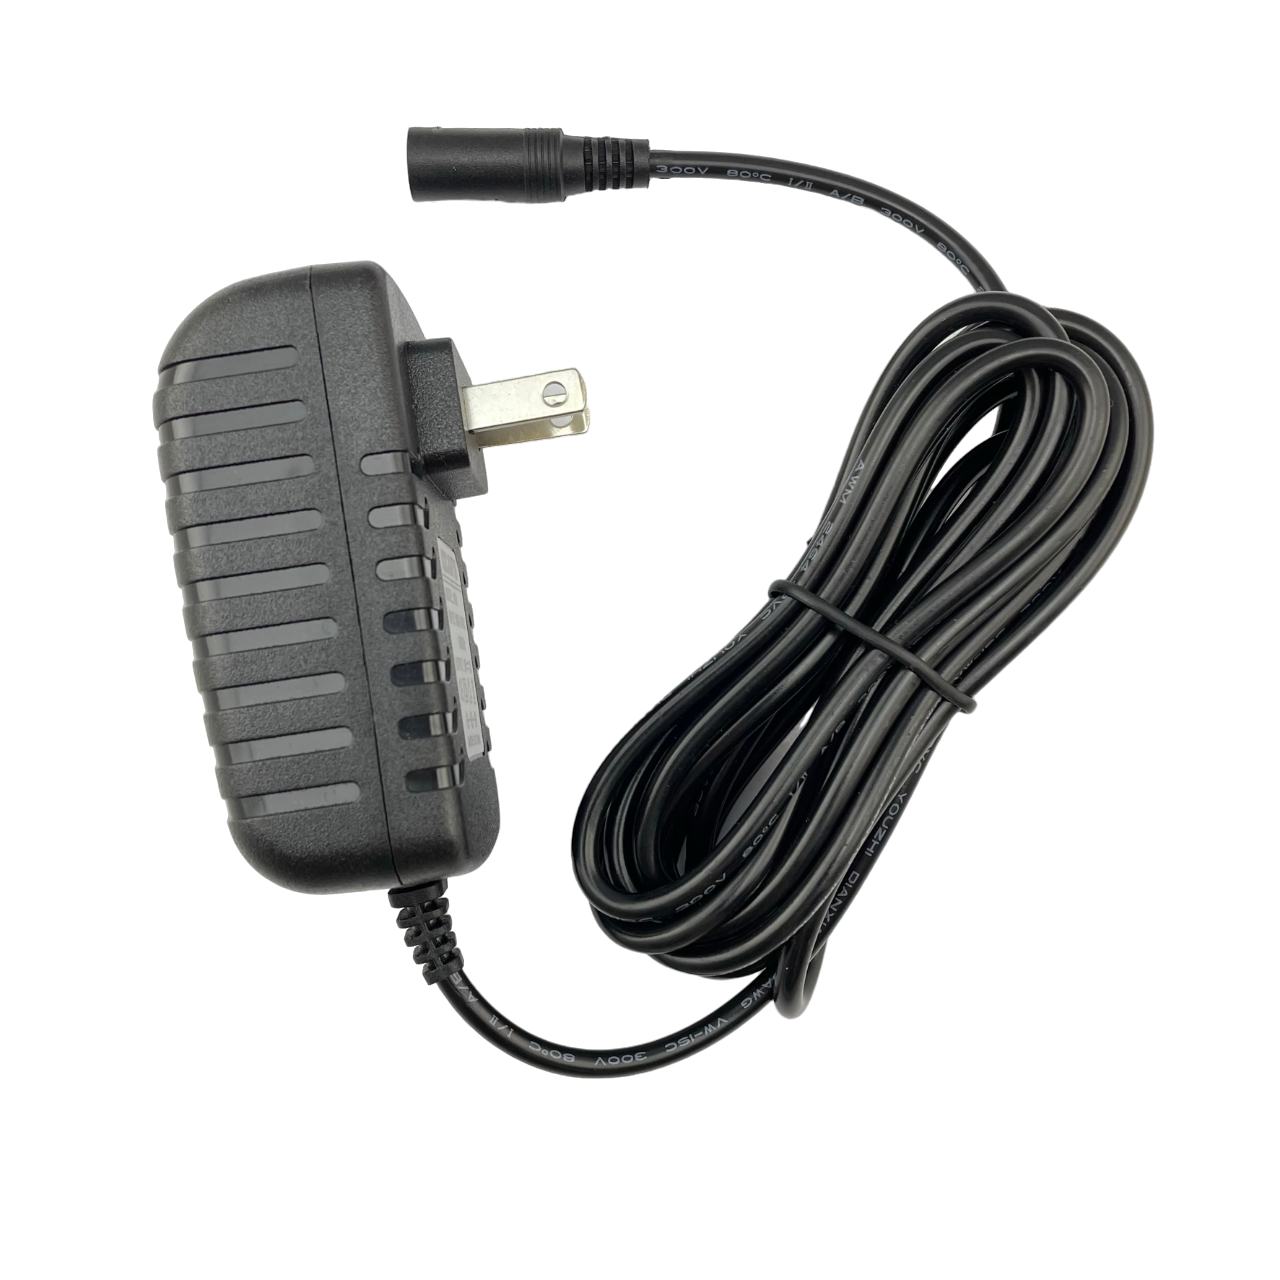 6ft SMAVCO 18V AC/DC Power Adapter for Levolor Motorized Blinds and Power Shades - Black-SMAVtronics